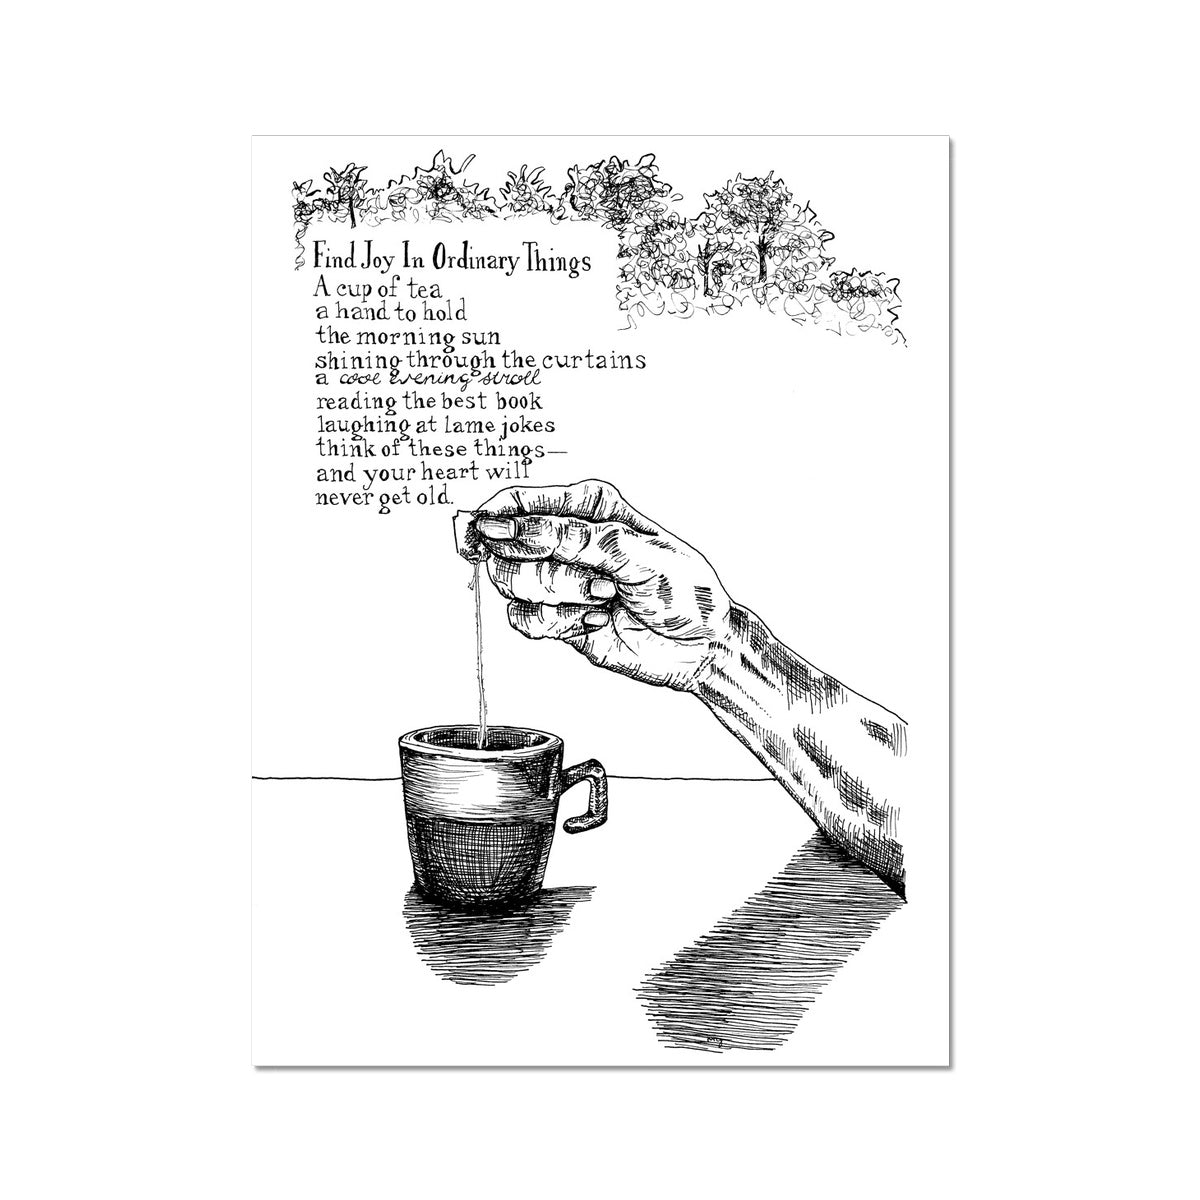 Image: line drawing of a hand and teacup with poem